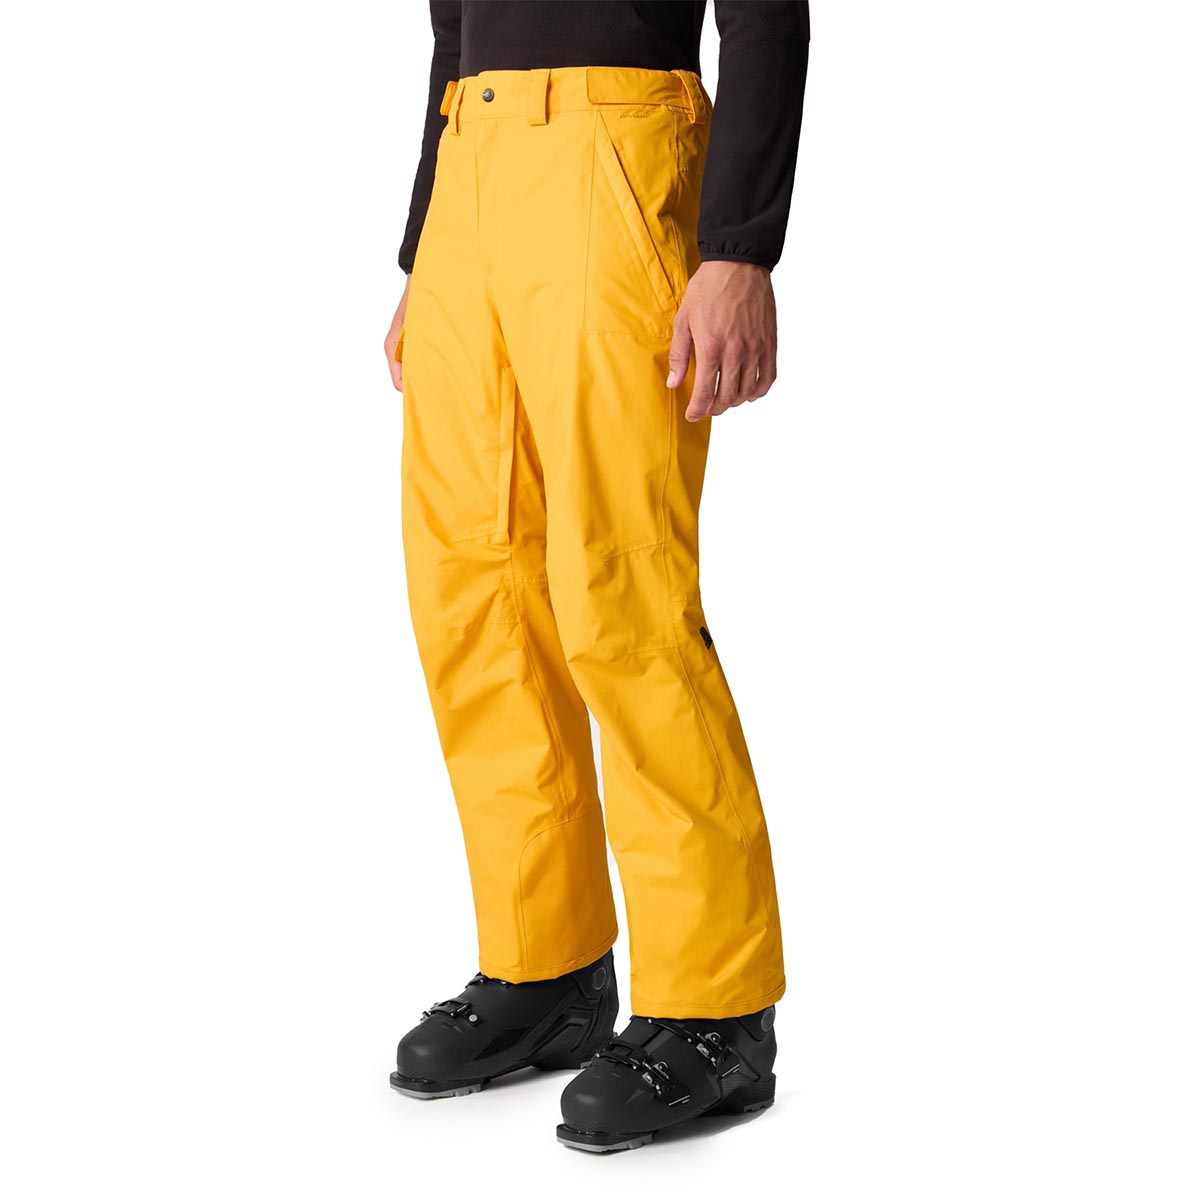 THE NORTH FACE - FREEDOM TROUSERS